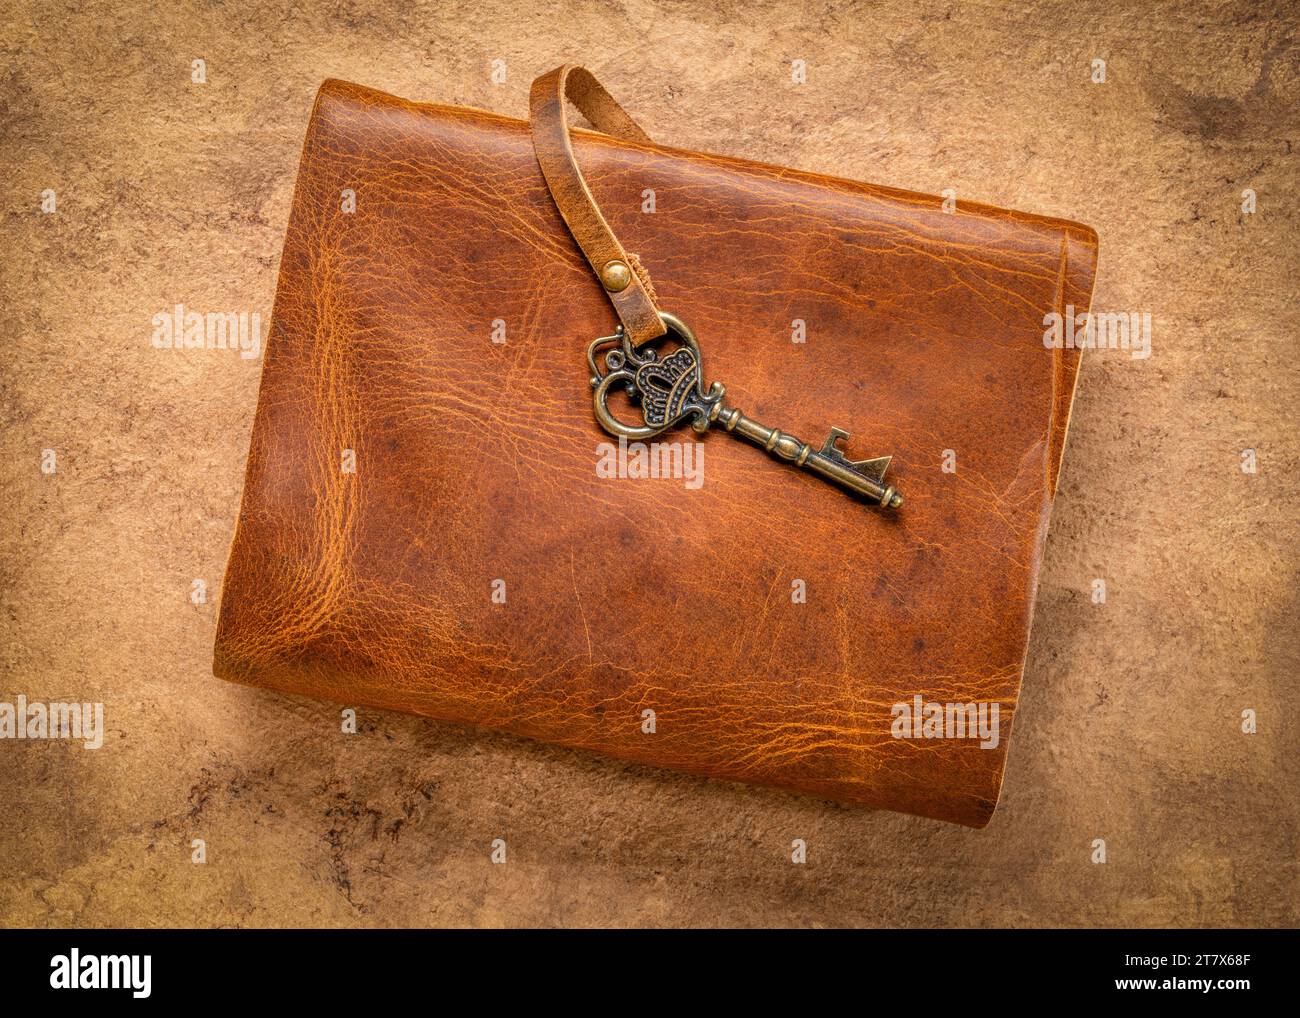 retro leather-bound journal with a decorative key on a handmade bark paper, journaling concept Stock Photo